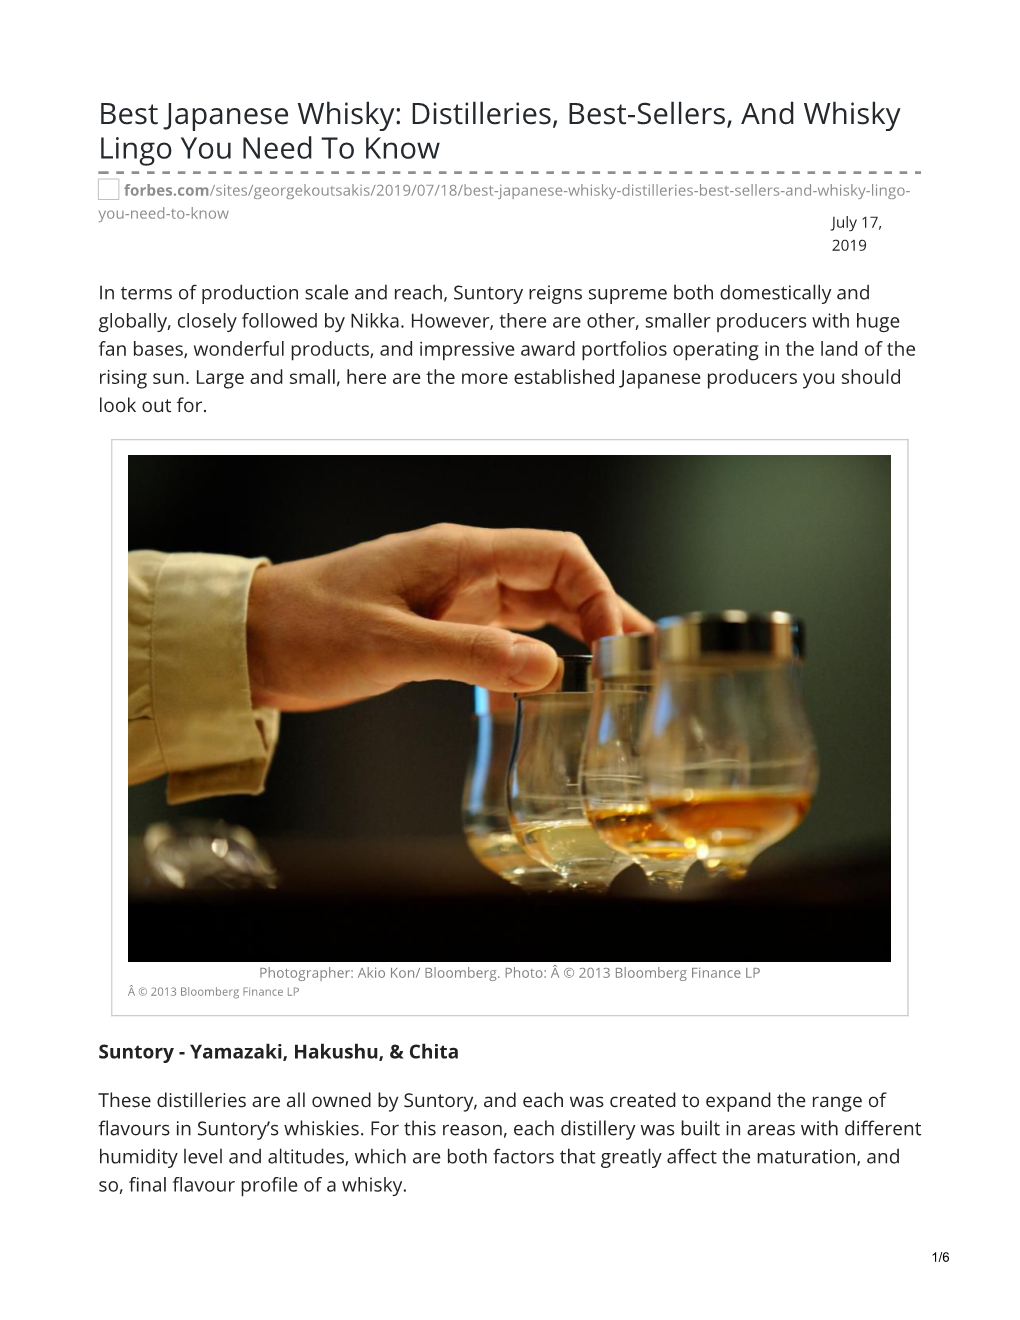 Best Japanese Whisky: Distilleries, Best-Sellers, and Whisky Lingo You Need to Know